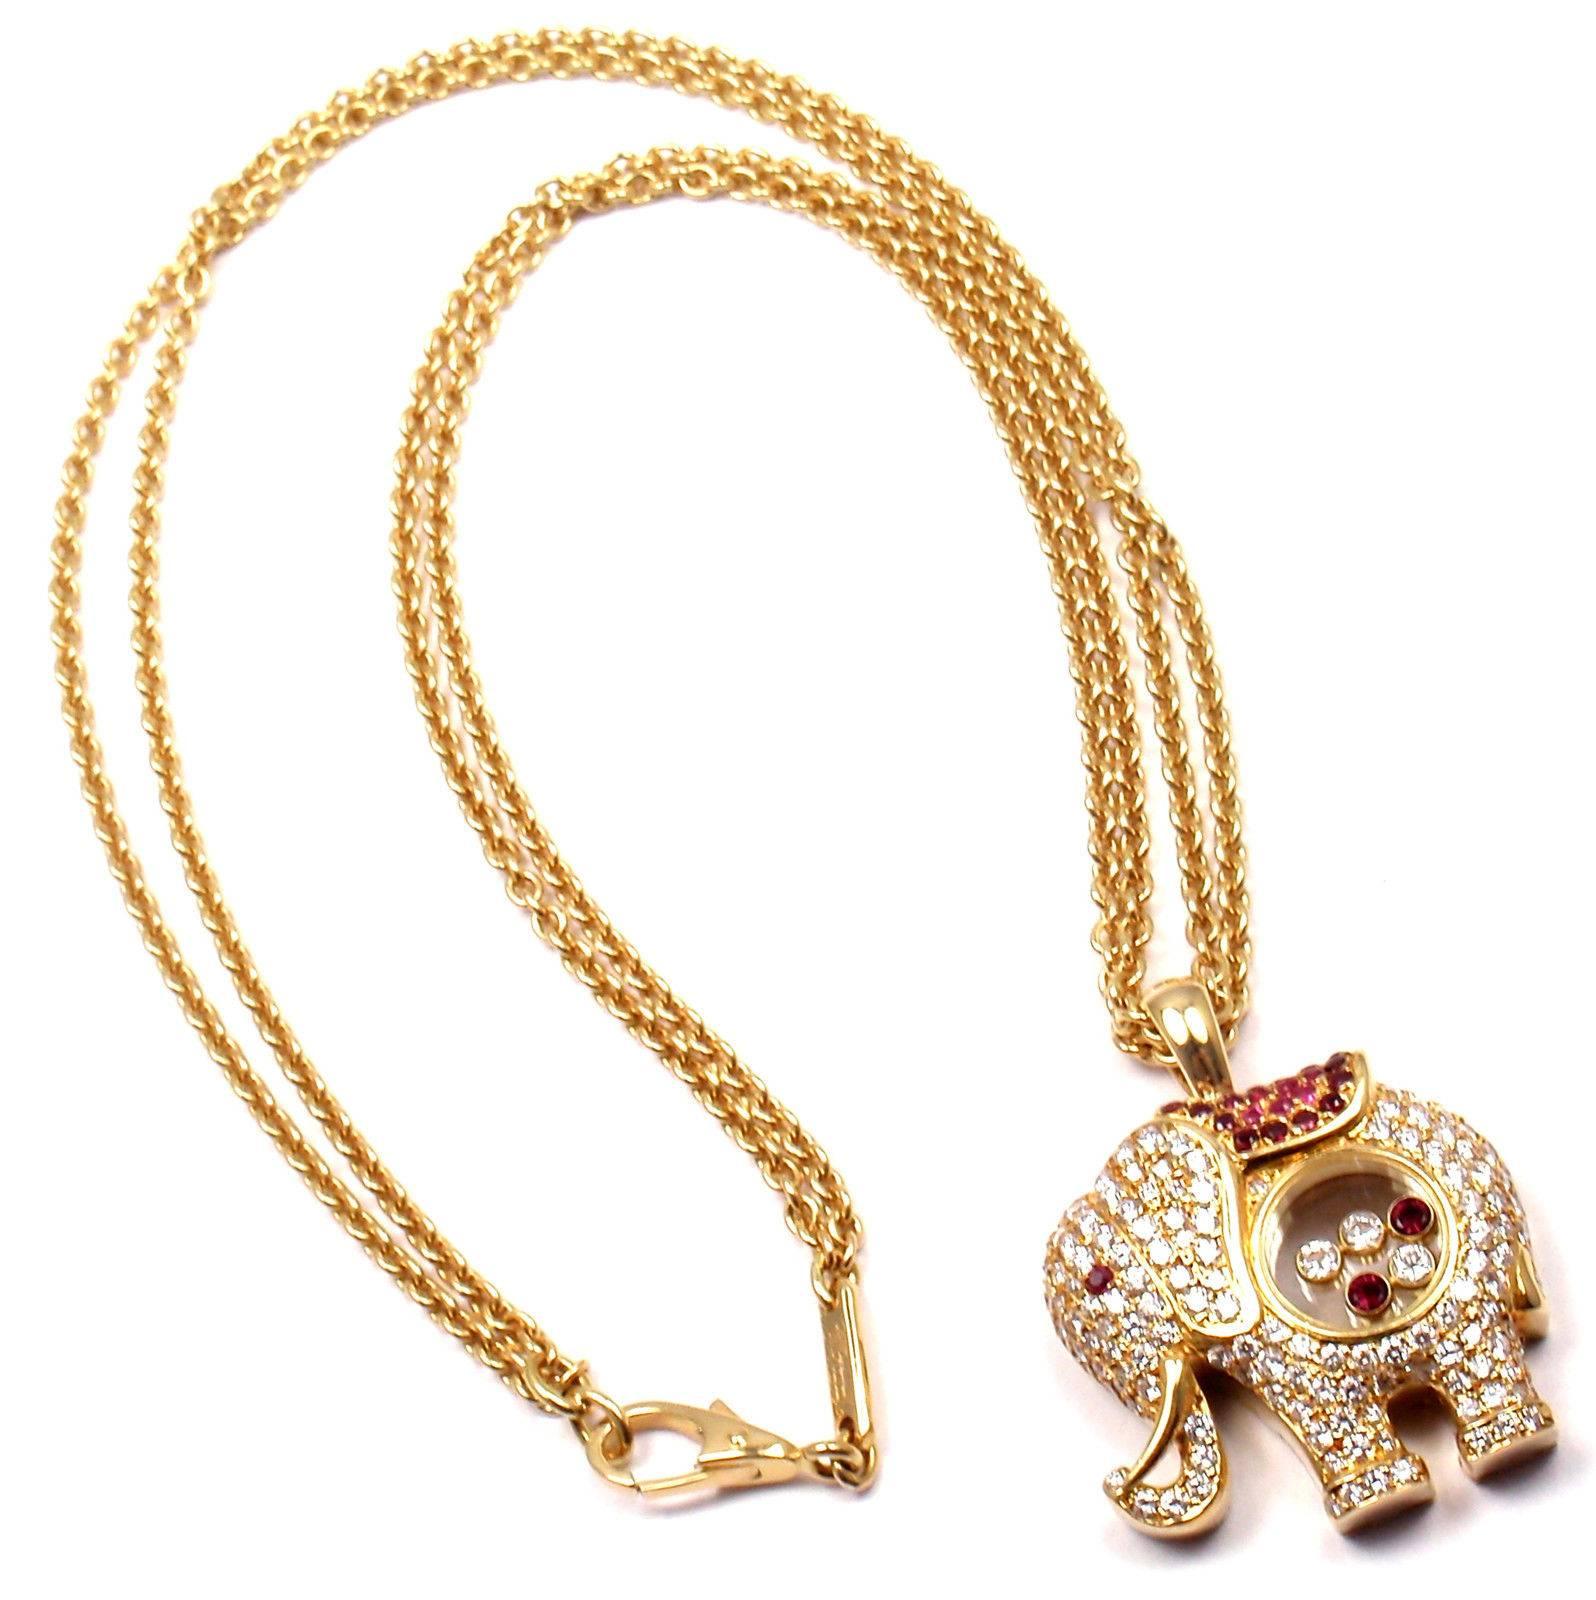 18k Yellow Gold Happy Elephant Diamond And Rubies Large Pendant Necklace by Chopard.  
With 22 round floating diamonds VS1 clarity, E color total weight approx. .22ct
3 round brilliant cut floating diamonds VS1 clarity, E color total weight .15ct
1